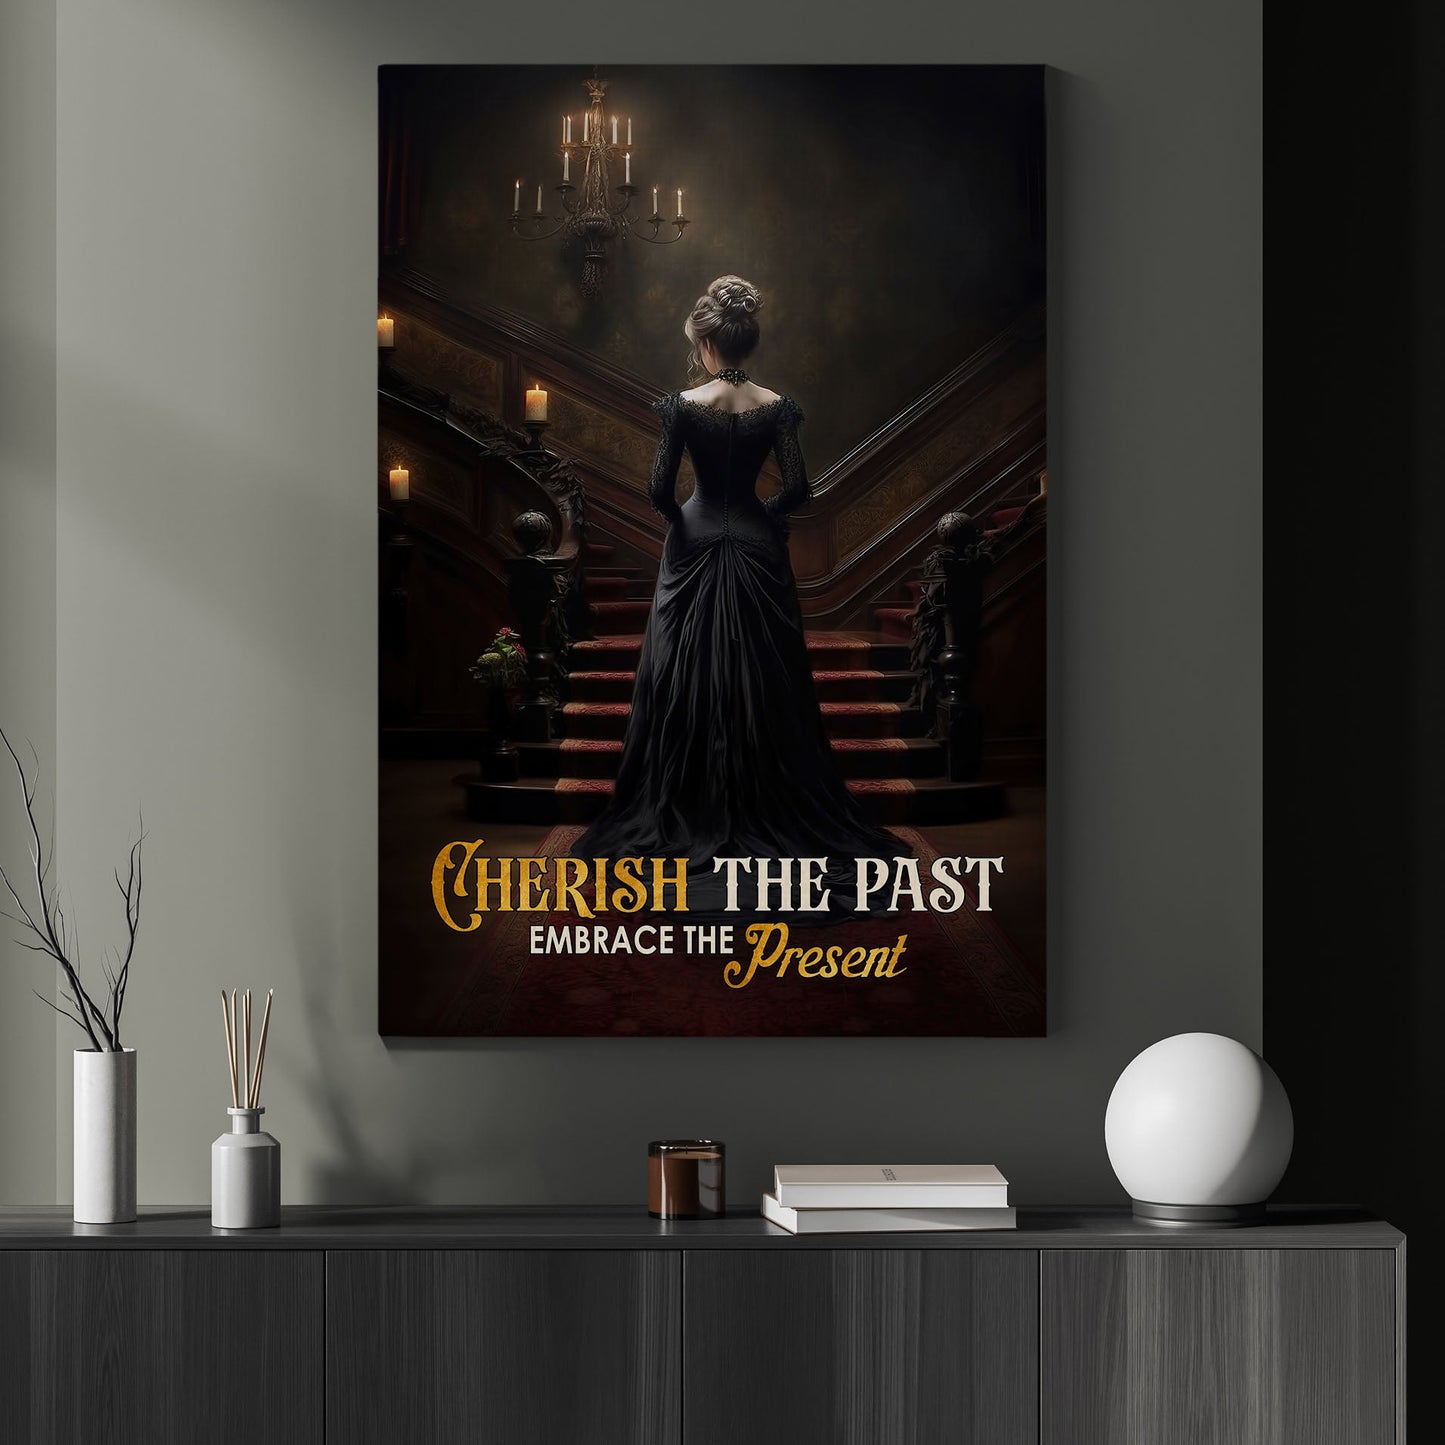 Cherish The Past Embrace The Present, Victorian Canvas Painting, Xmas Wall Art Decor - Christmas Poster Gift